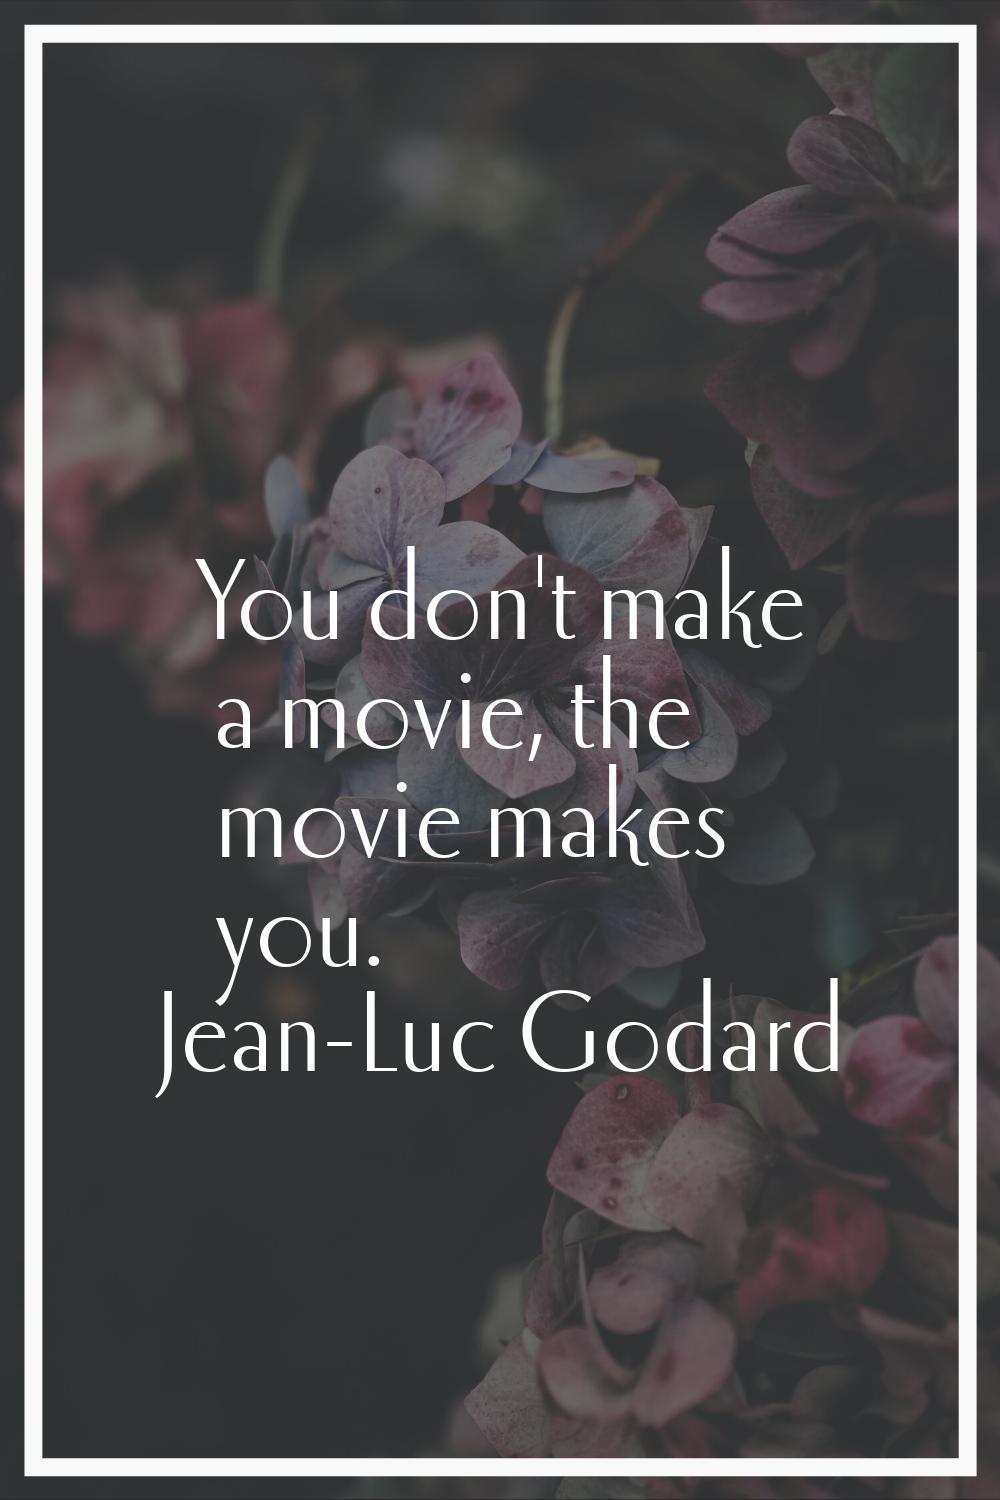 You don't make a movie, the movie makes you.